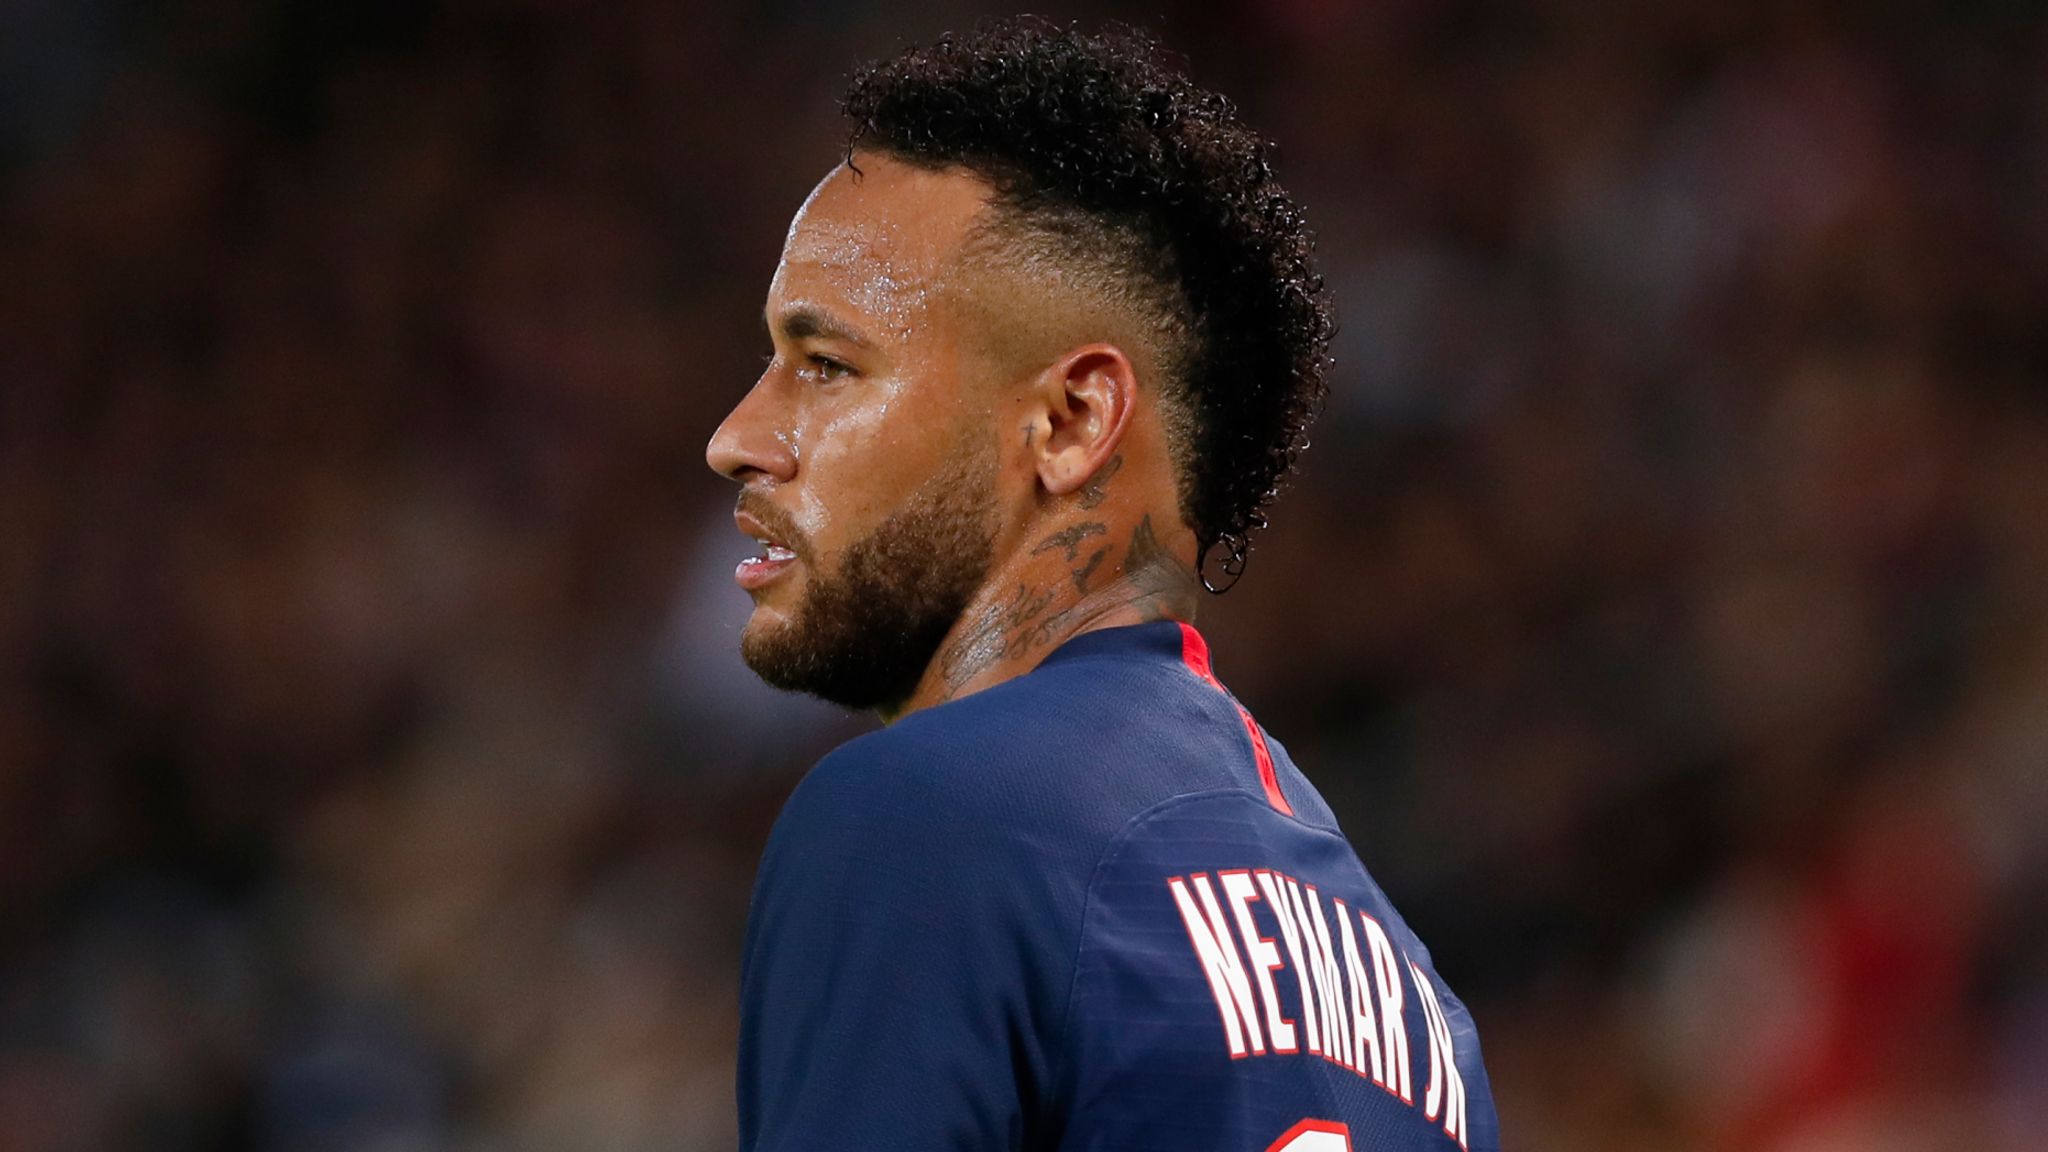 Neymar has already named four Premier League clubs he would sign for amid  PSG exit speculation